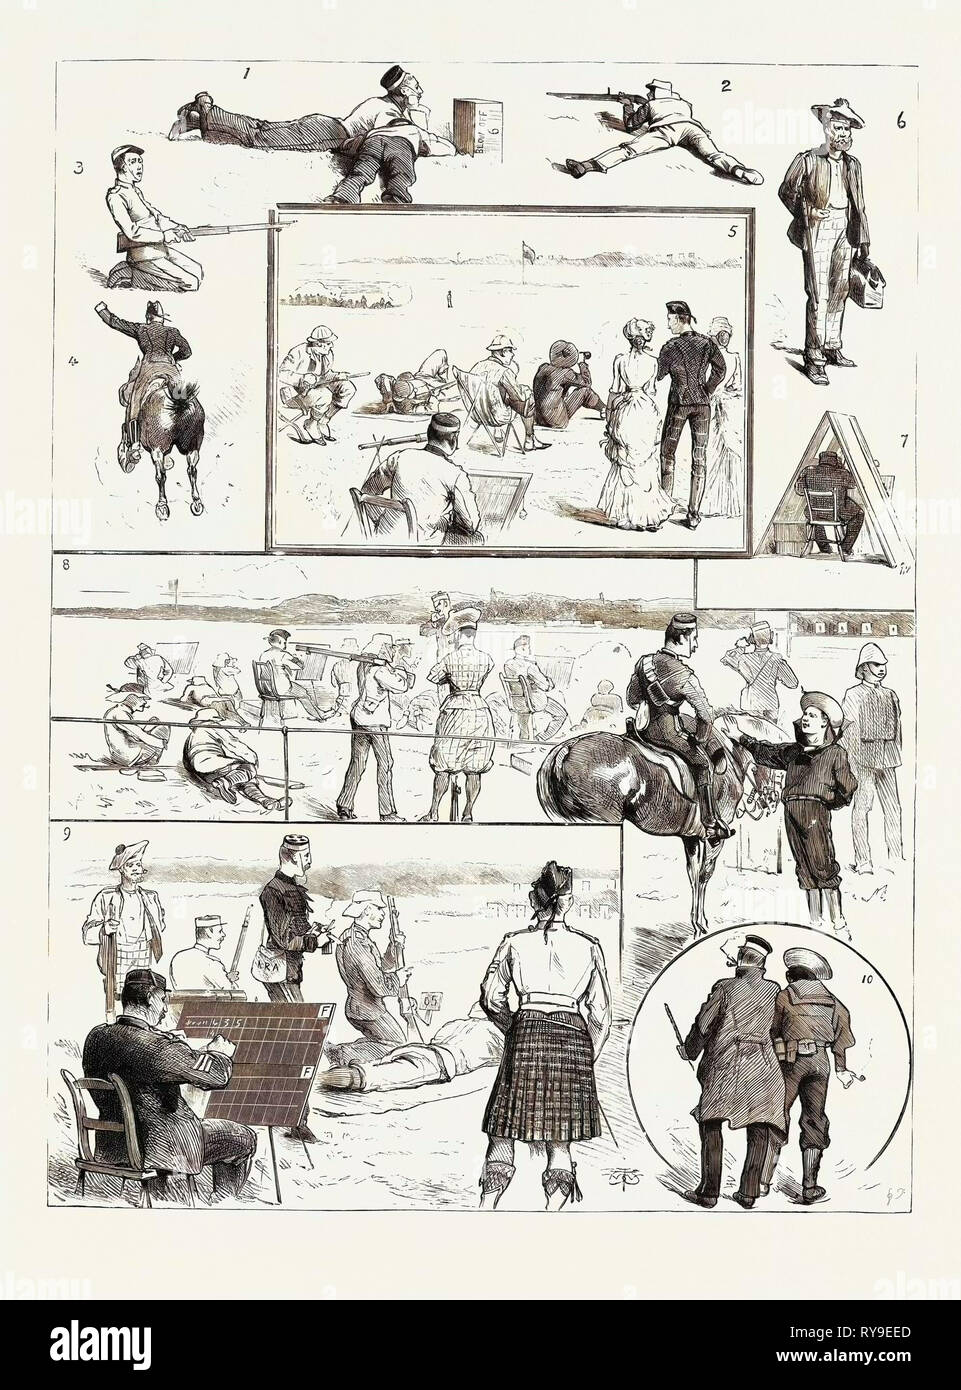 Volunteer Camp Windsor, I. Sleeping Partners. 2. Military Position, 3. In Flagrante Delicto. 4. Hi, Sir I What the  5. The Humphrey Cup. 6. A Commercial Speculation. 7. A Tight Fit. 8. The First Stage Queen's. 9. The Graphic ! Best of Chums, Engraving 1884, UK, Britain, British, Europe, United Kingdom, Great Britain, European Stock Photo